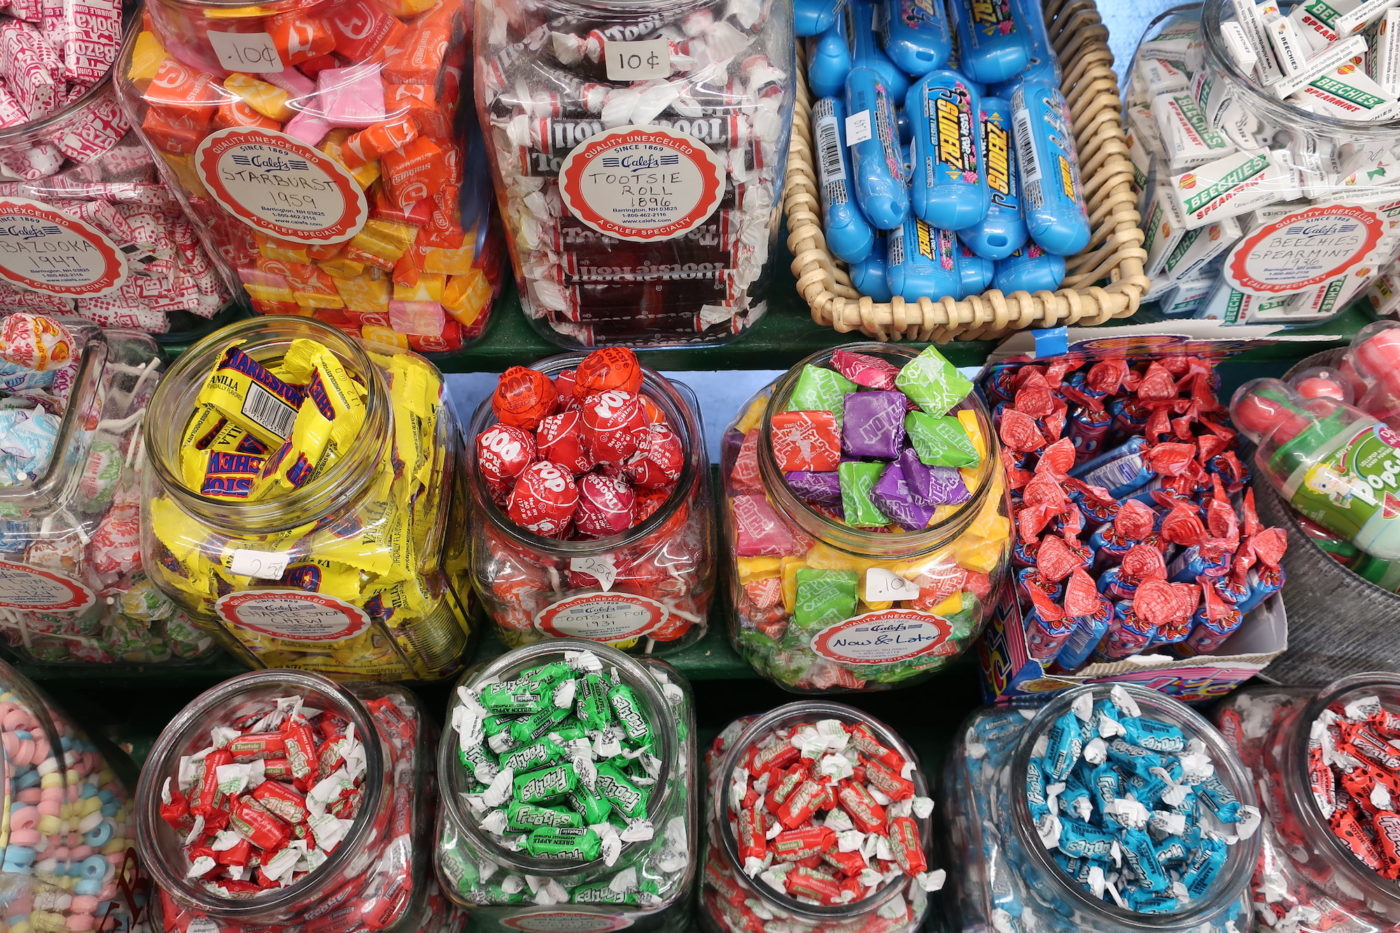 Jars of jars of candy at Calef's Candyland